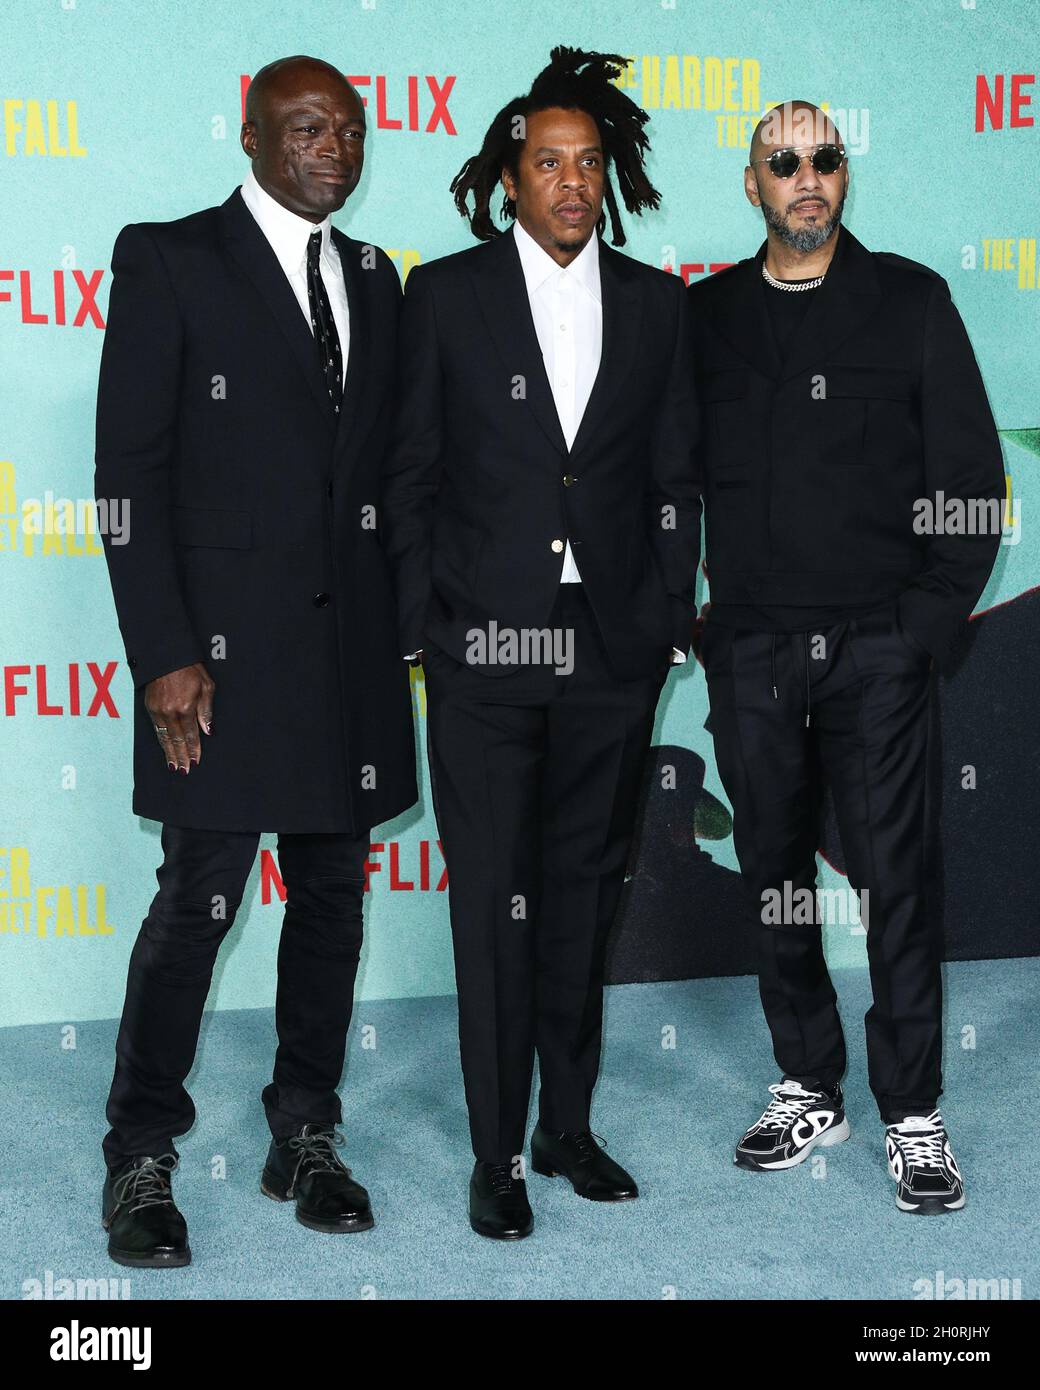 Los Angeles, United States. 13th Oct, 2021. LOS ANGELES, CALIFORNIA, USA - OCTOBER 13: Singer-songwriter Seal (Henry Olusegun Adeola Samuel), rapper/producer Jay-Z (Shawn Corey Carter) and record producer Swizz Beatz (Kasseem Daoud Dean) arrive at the Los Angeles Premiere Of Netflix's 'The Harder They Fall' held at the Shrine Auditorium and Expo Hall on October 13, 2021 in Los Angeles, California, United States. (Photo by Xavier Collin/Image Press Agency/Sipa USA) Credit: Sipa USA/Alamy Live News Stock Photo